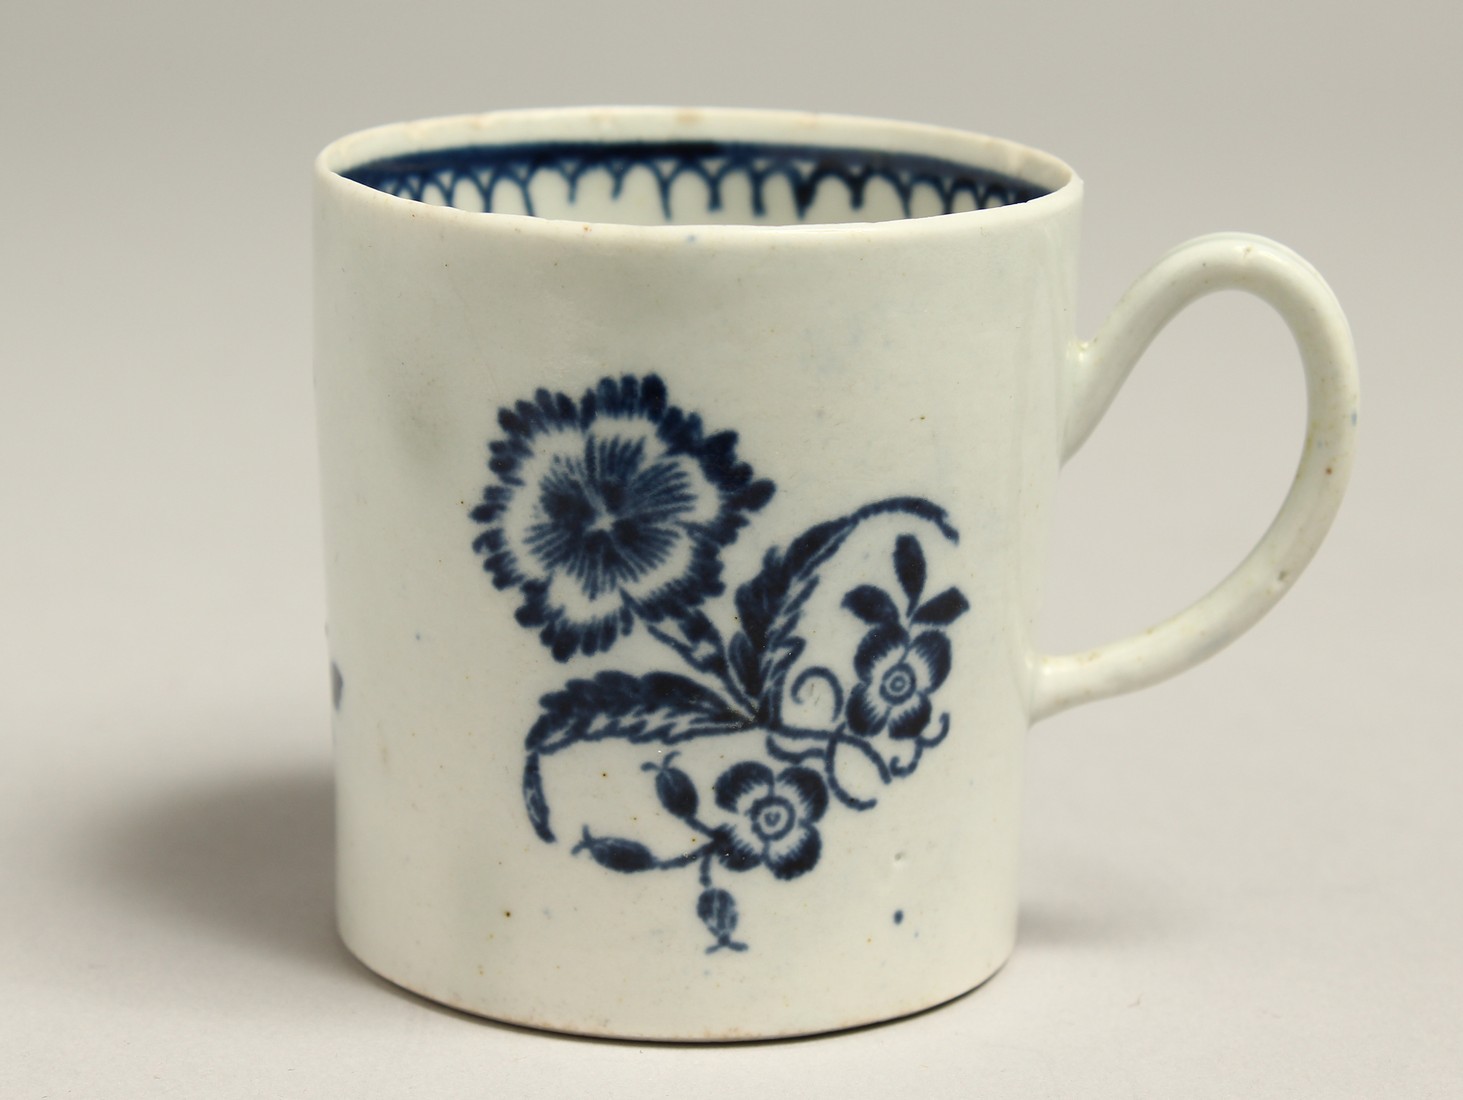 A PENNINGTONS LIVERPOOL BLUE AND WHITE CAN, Gillyflower Pattern, circa. 19790.